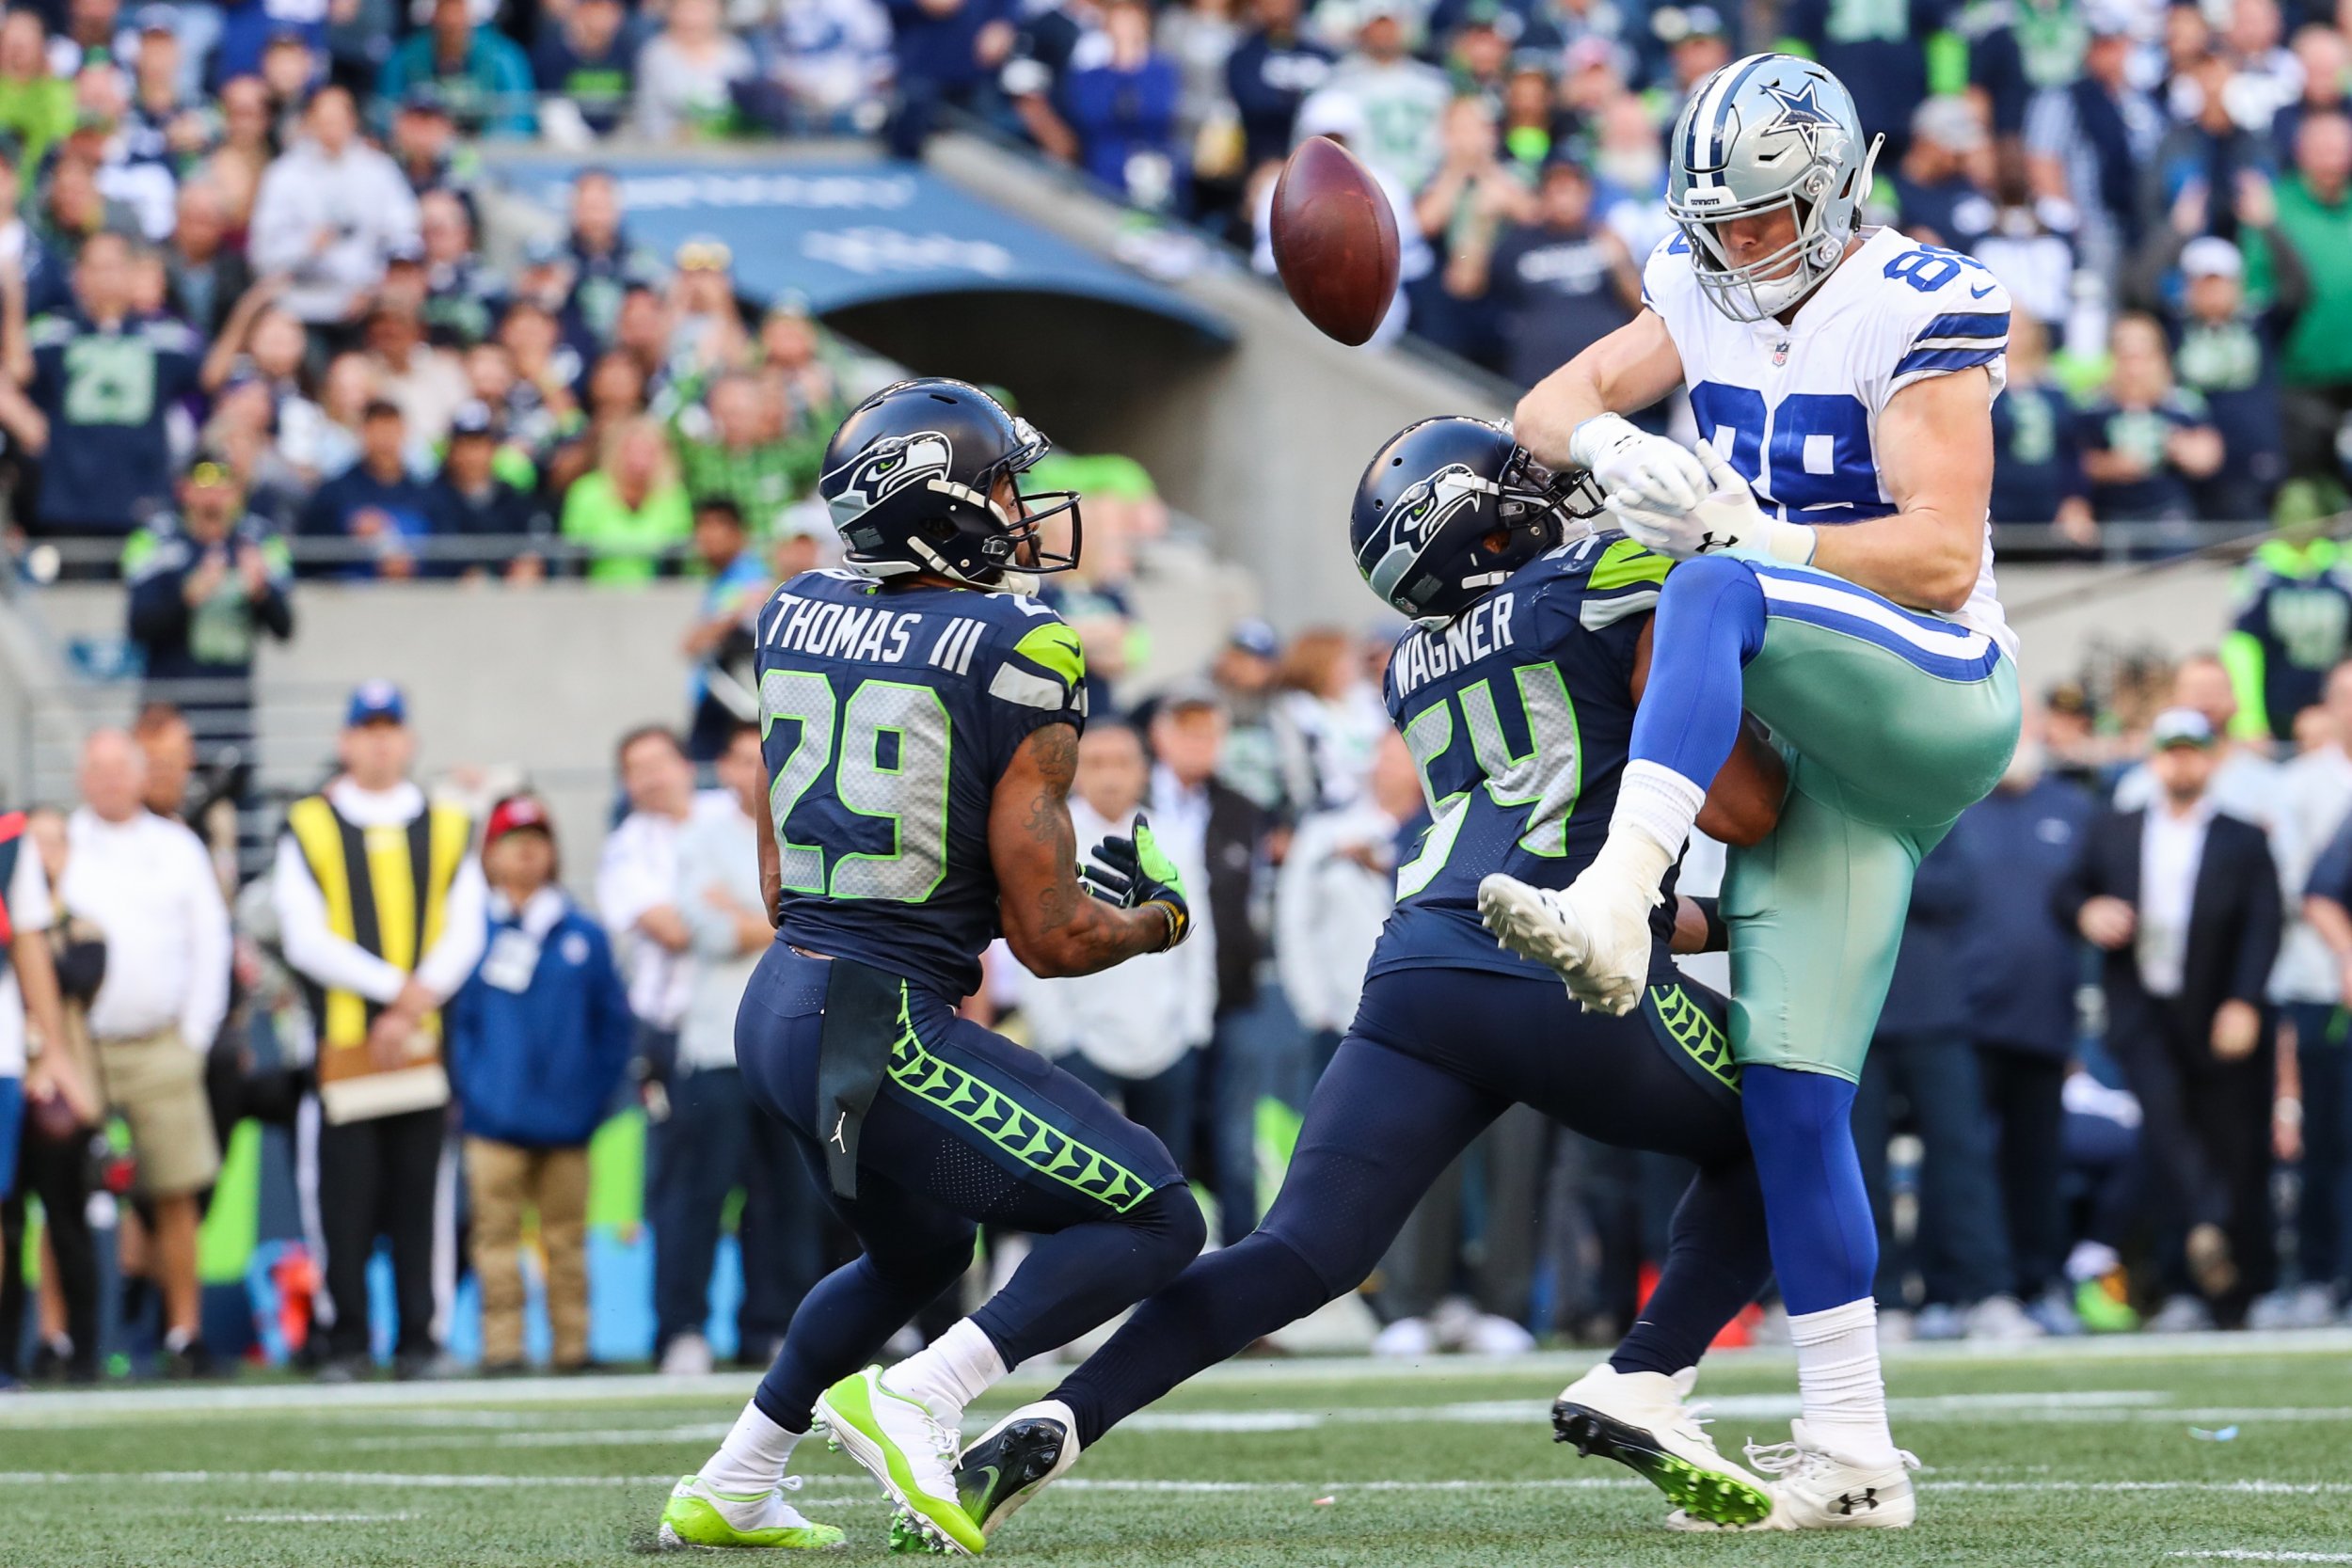 NFL Playoffs How to Watch, Live Stream the Seattle Seahawks vs